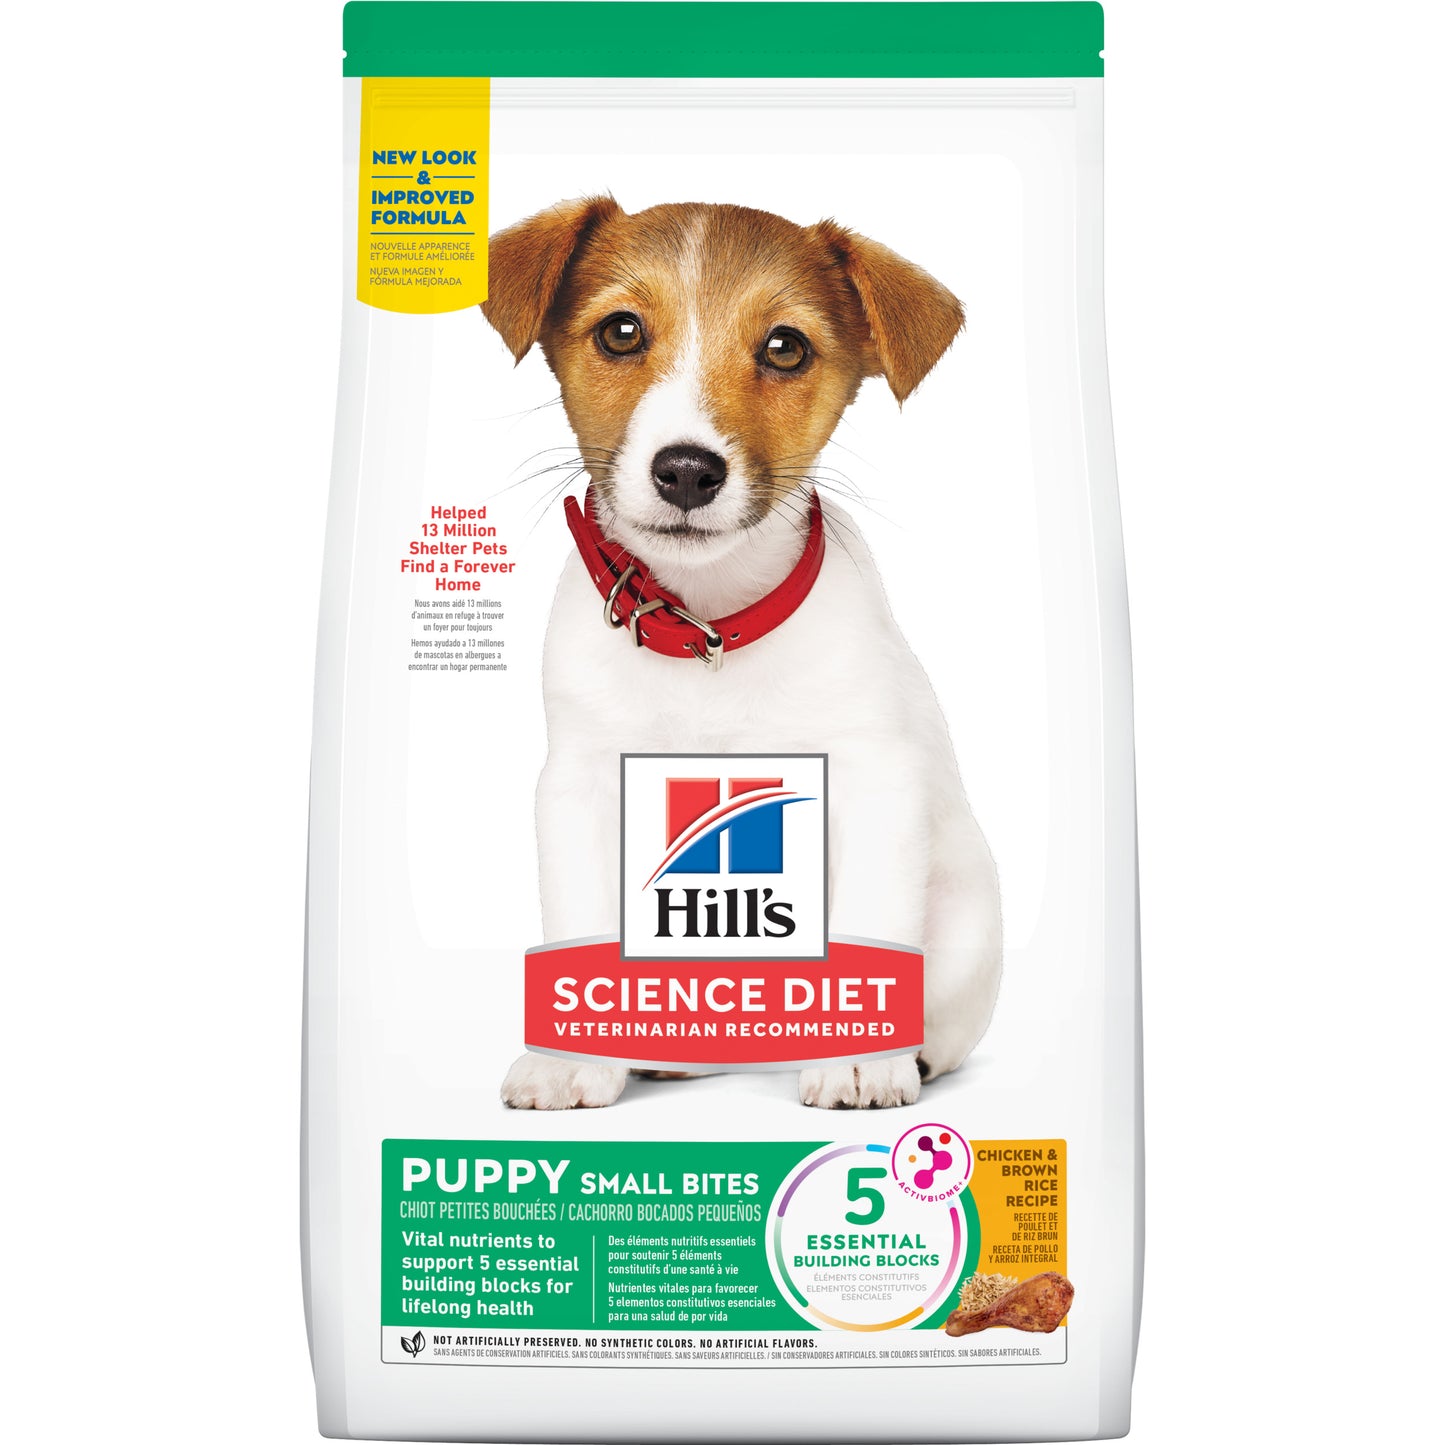 Hill's Science Diet Puppy Small Bites Dry Dog Food